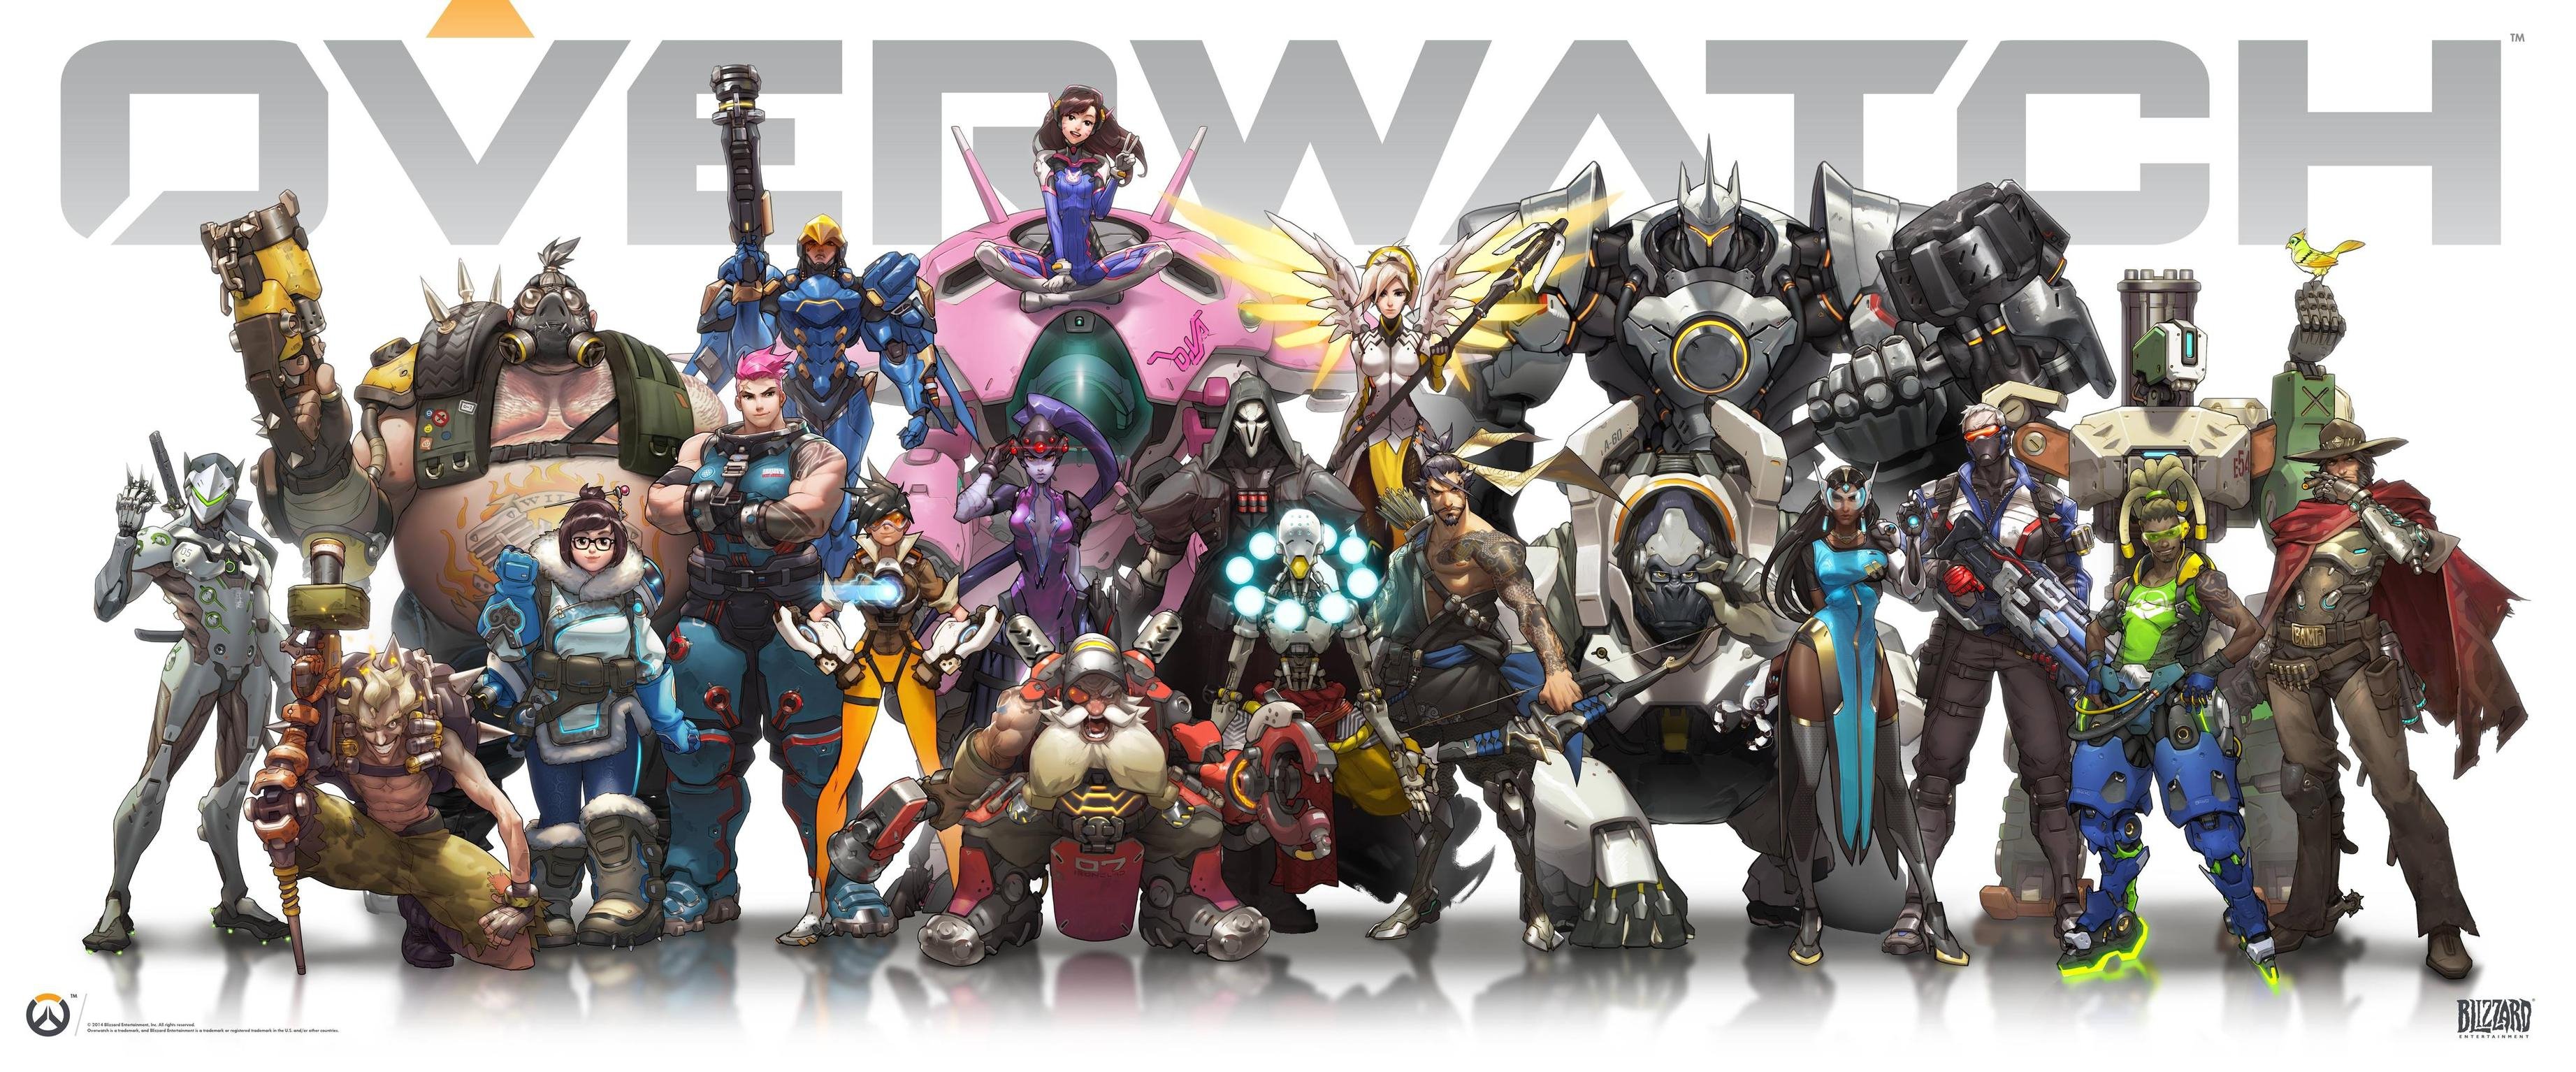 14265-overwatch-at-day-1-of-blizzcon.jpg